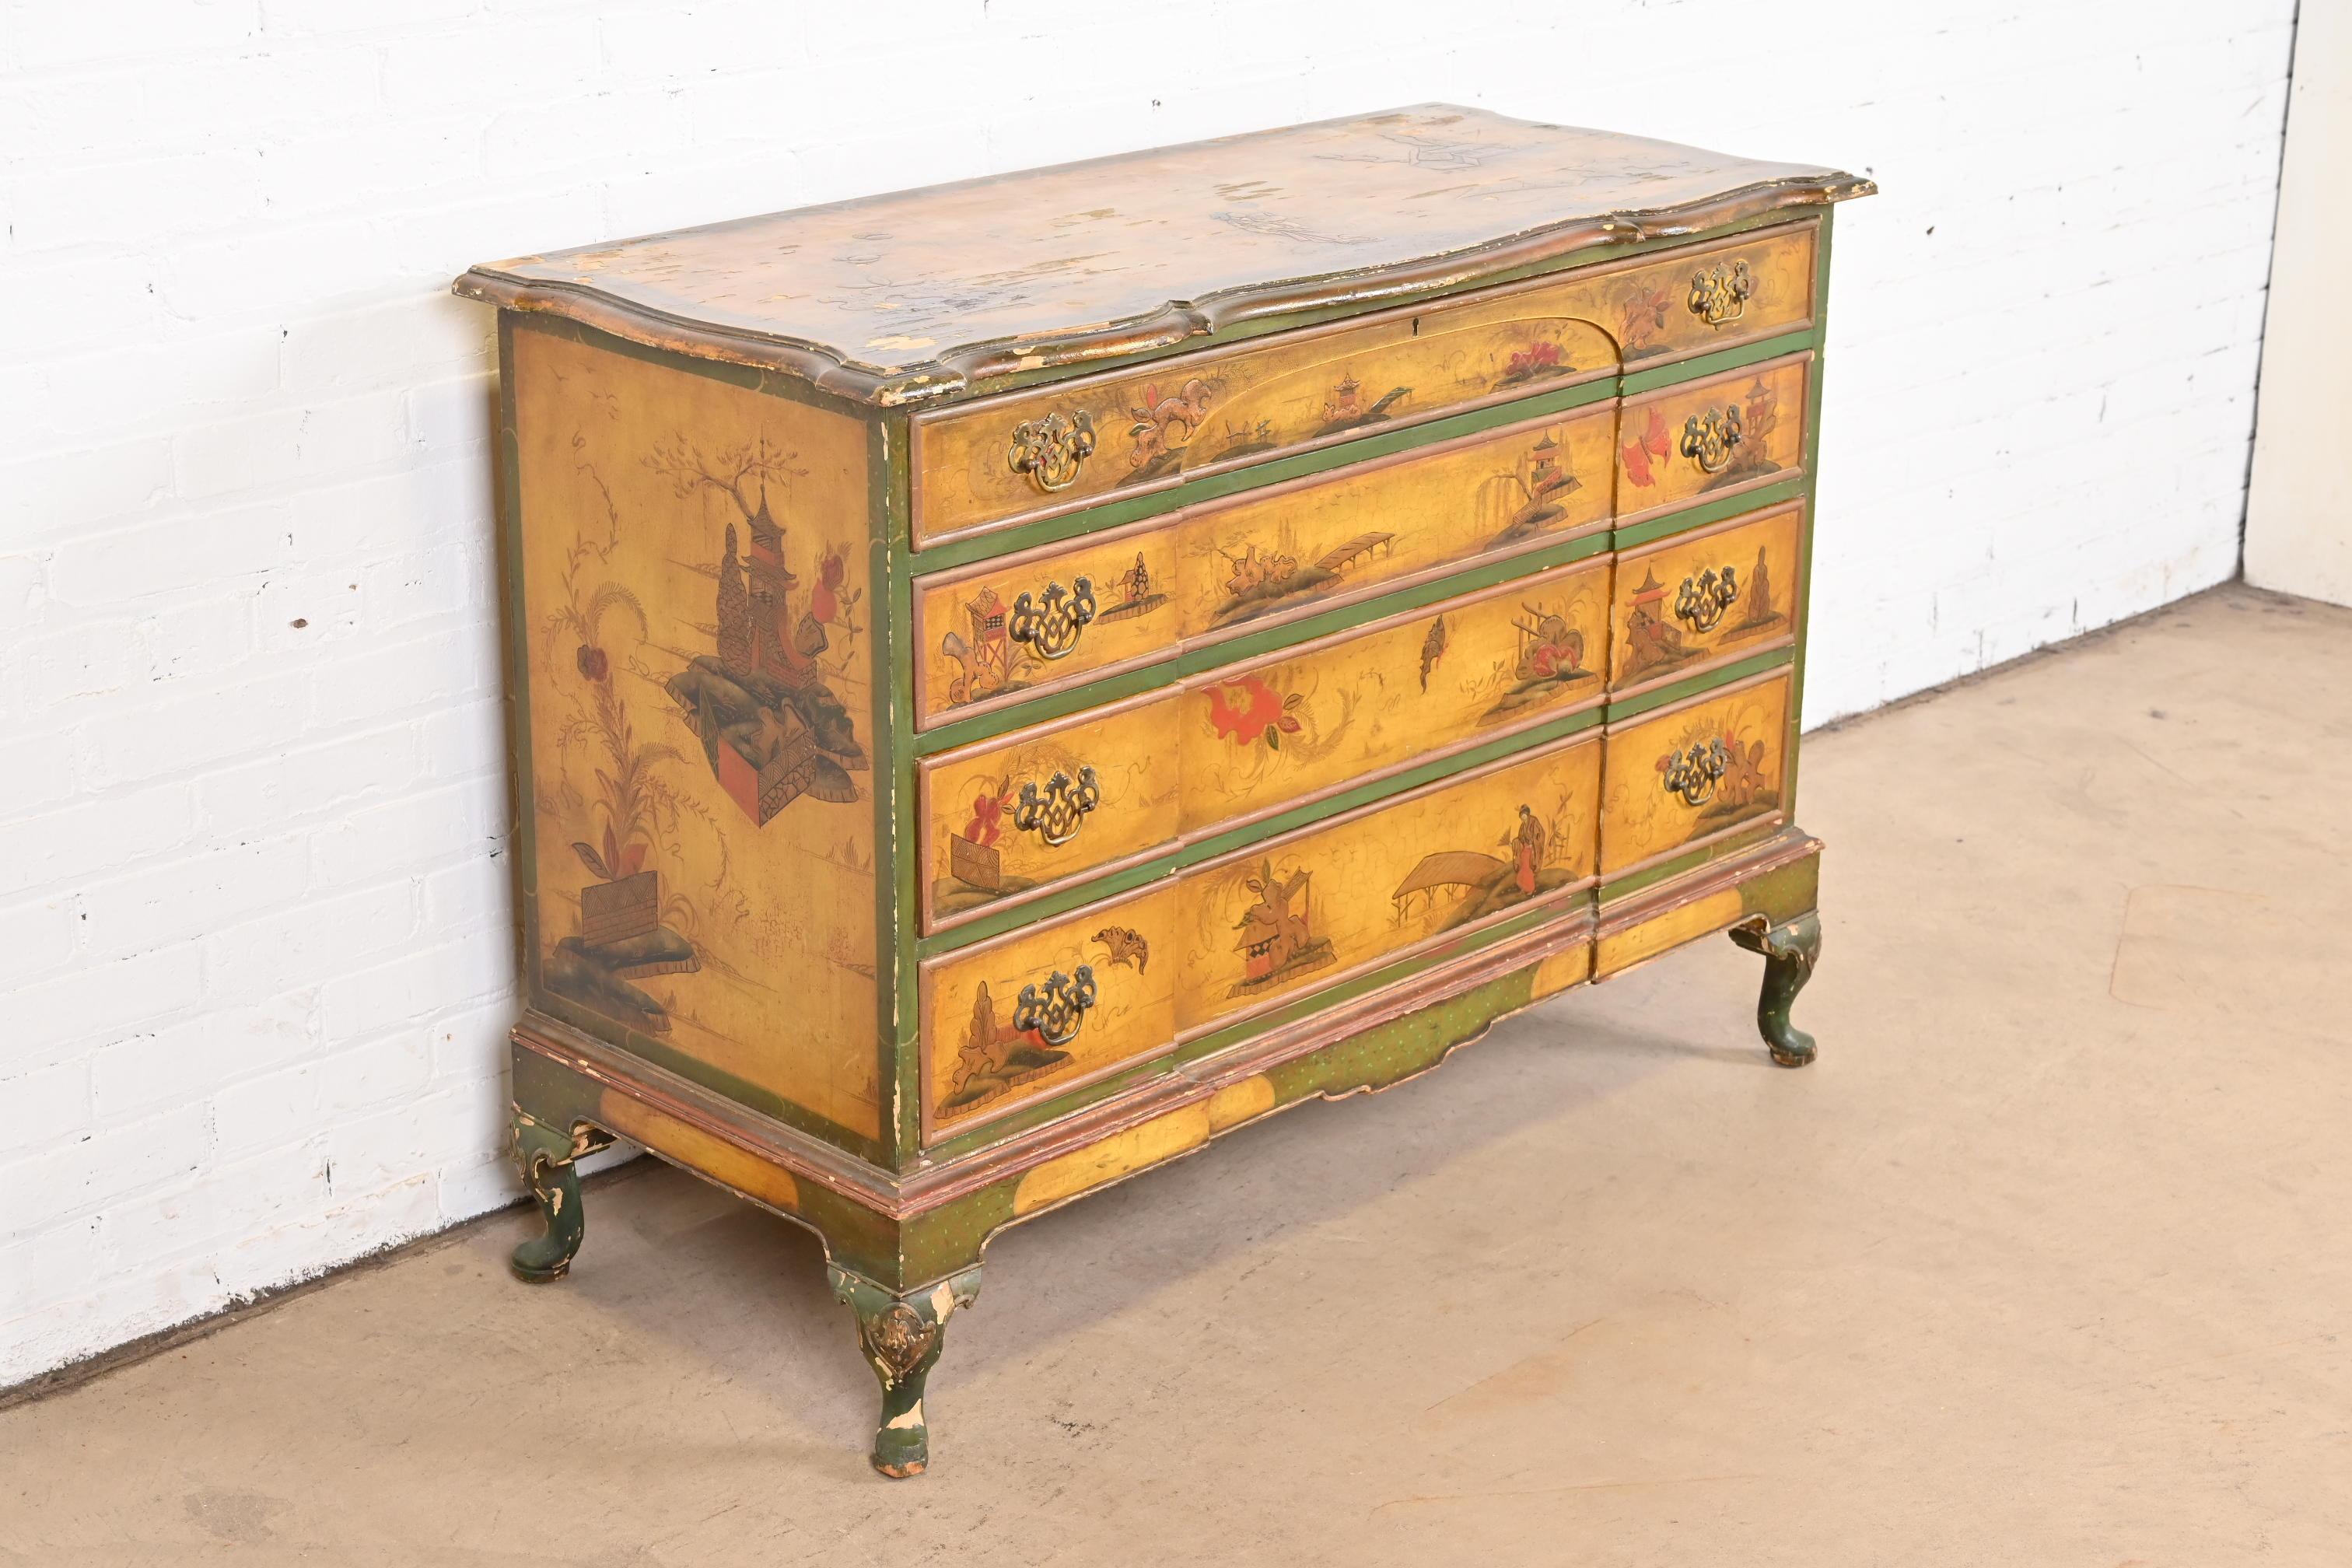 Brass Antique Japanned Chinoiserie Queen Anne Bureau From Historic Edgecroft Mansion For Sale